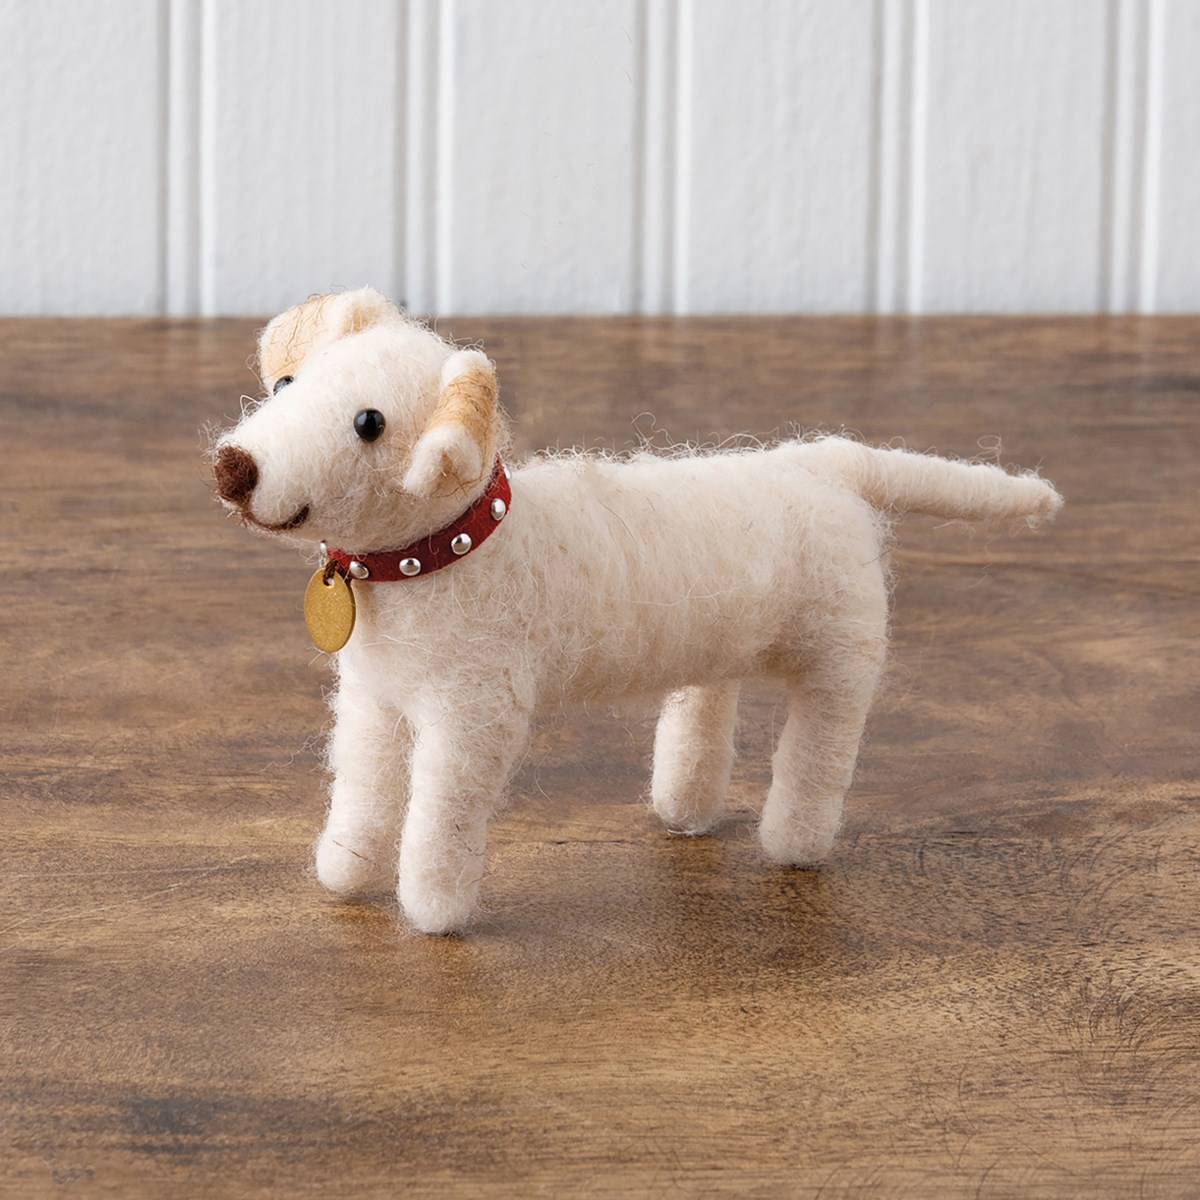 Lab Pup With Collar Critter - Felt, Polyester, Plastic